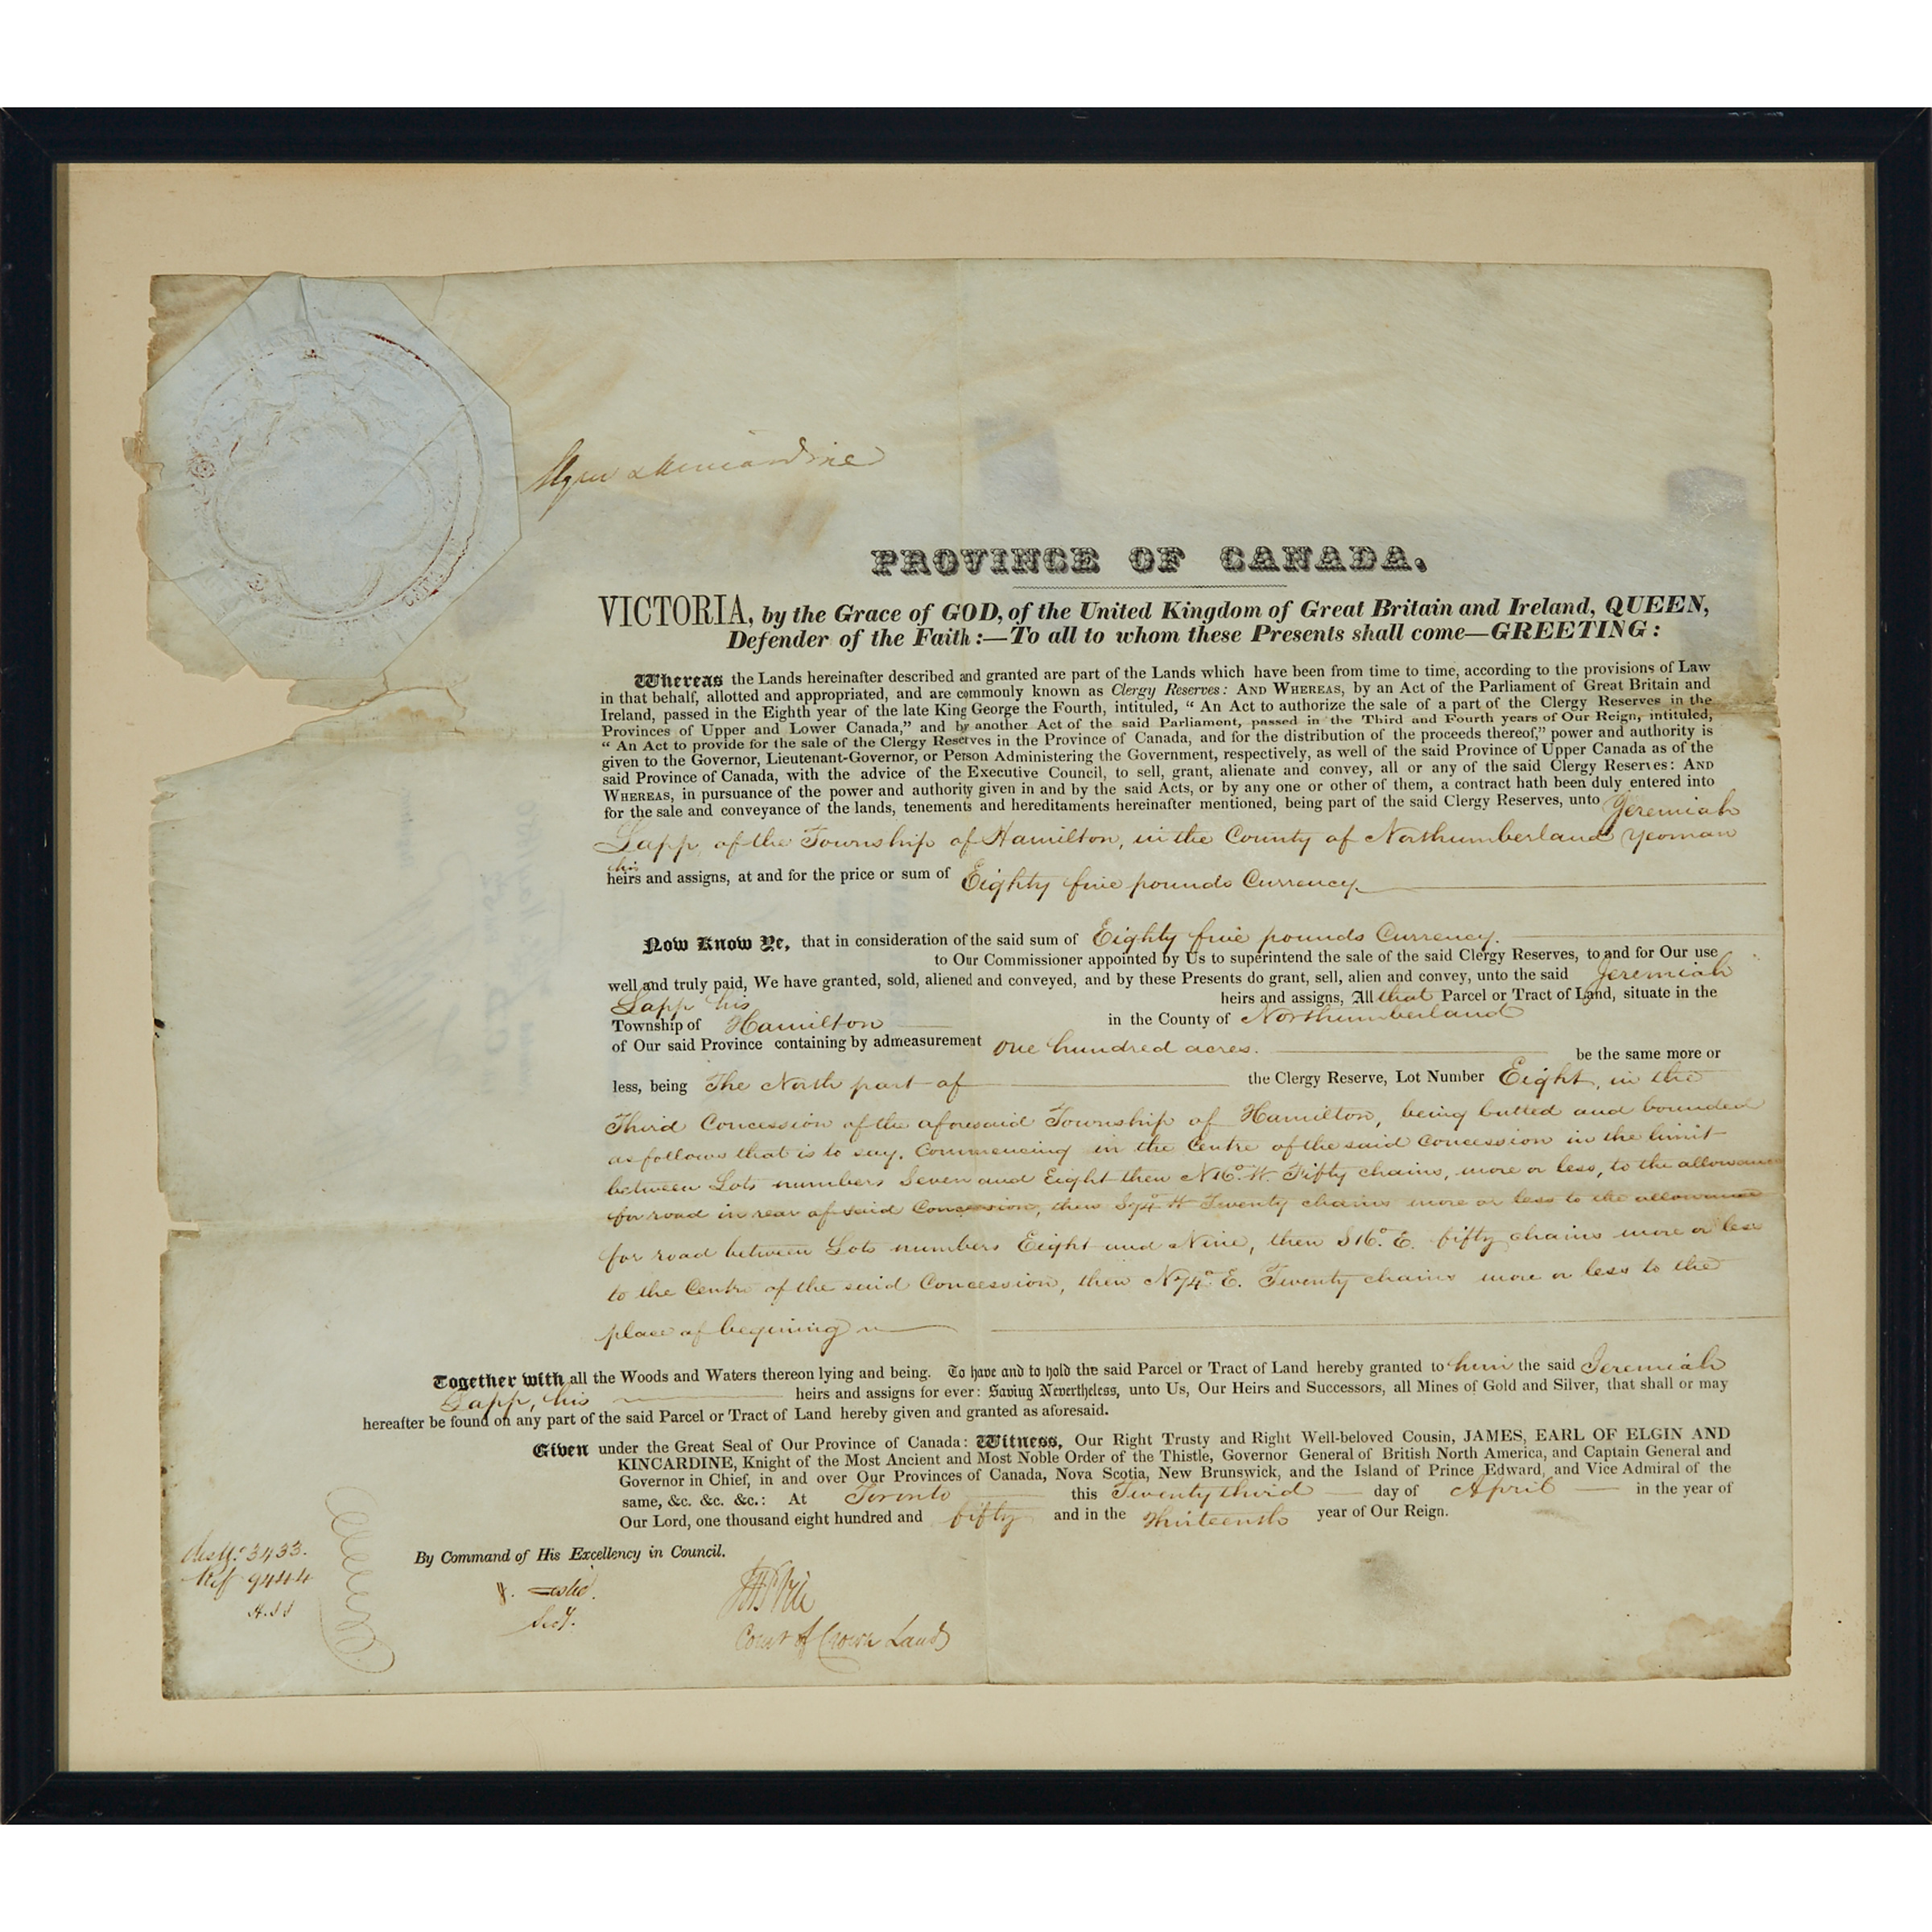 Victorian Province of Canada, Northumberland County Land Grant to Joseph Sapp, 1850